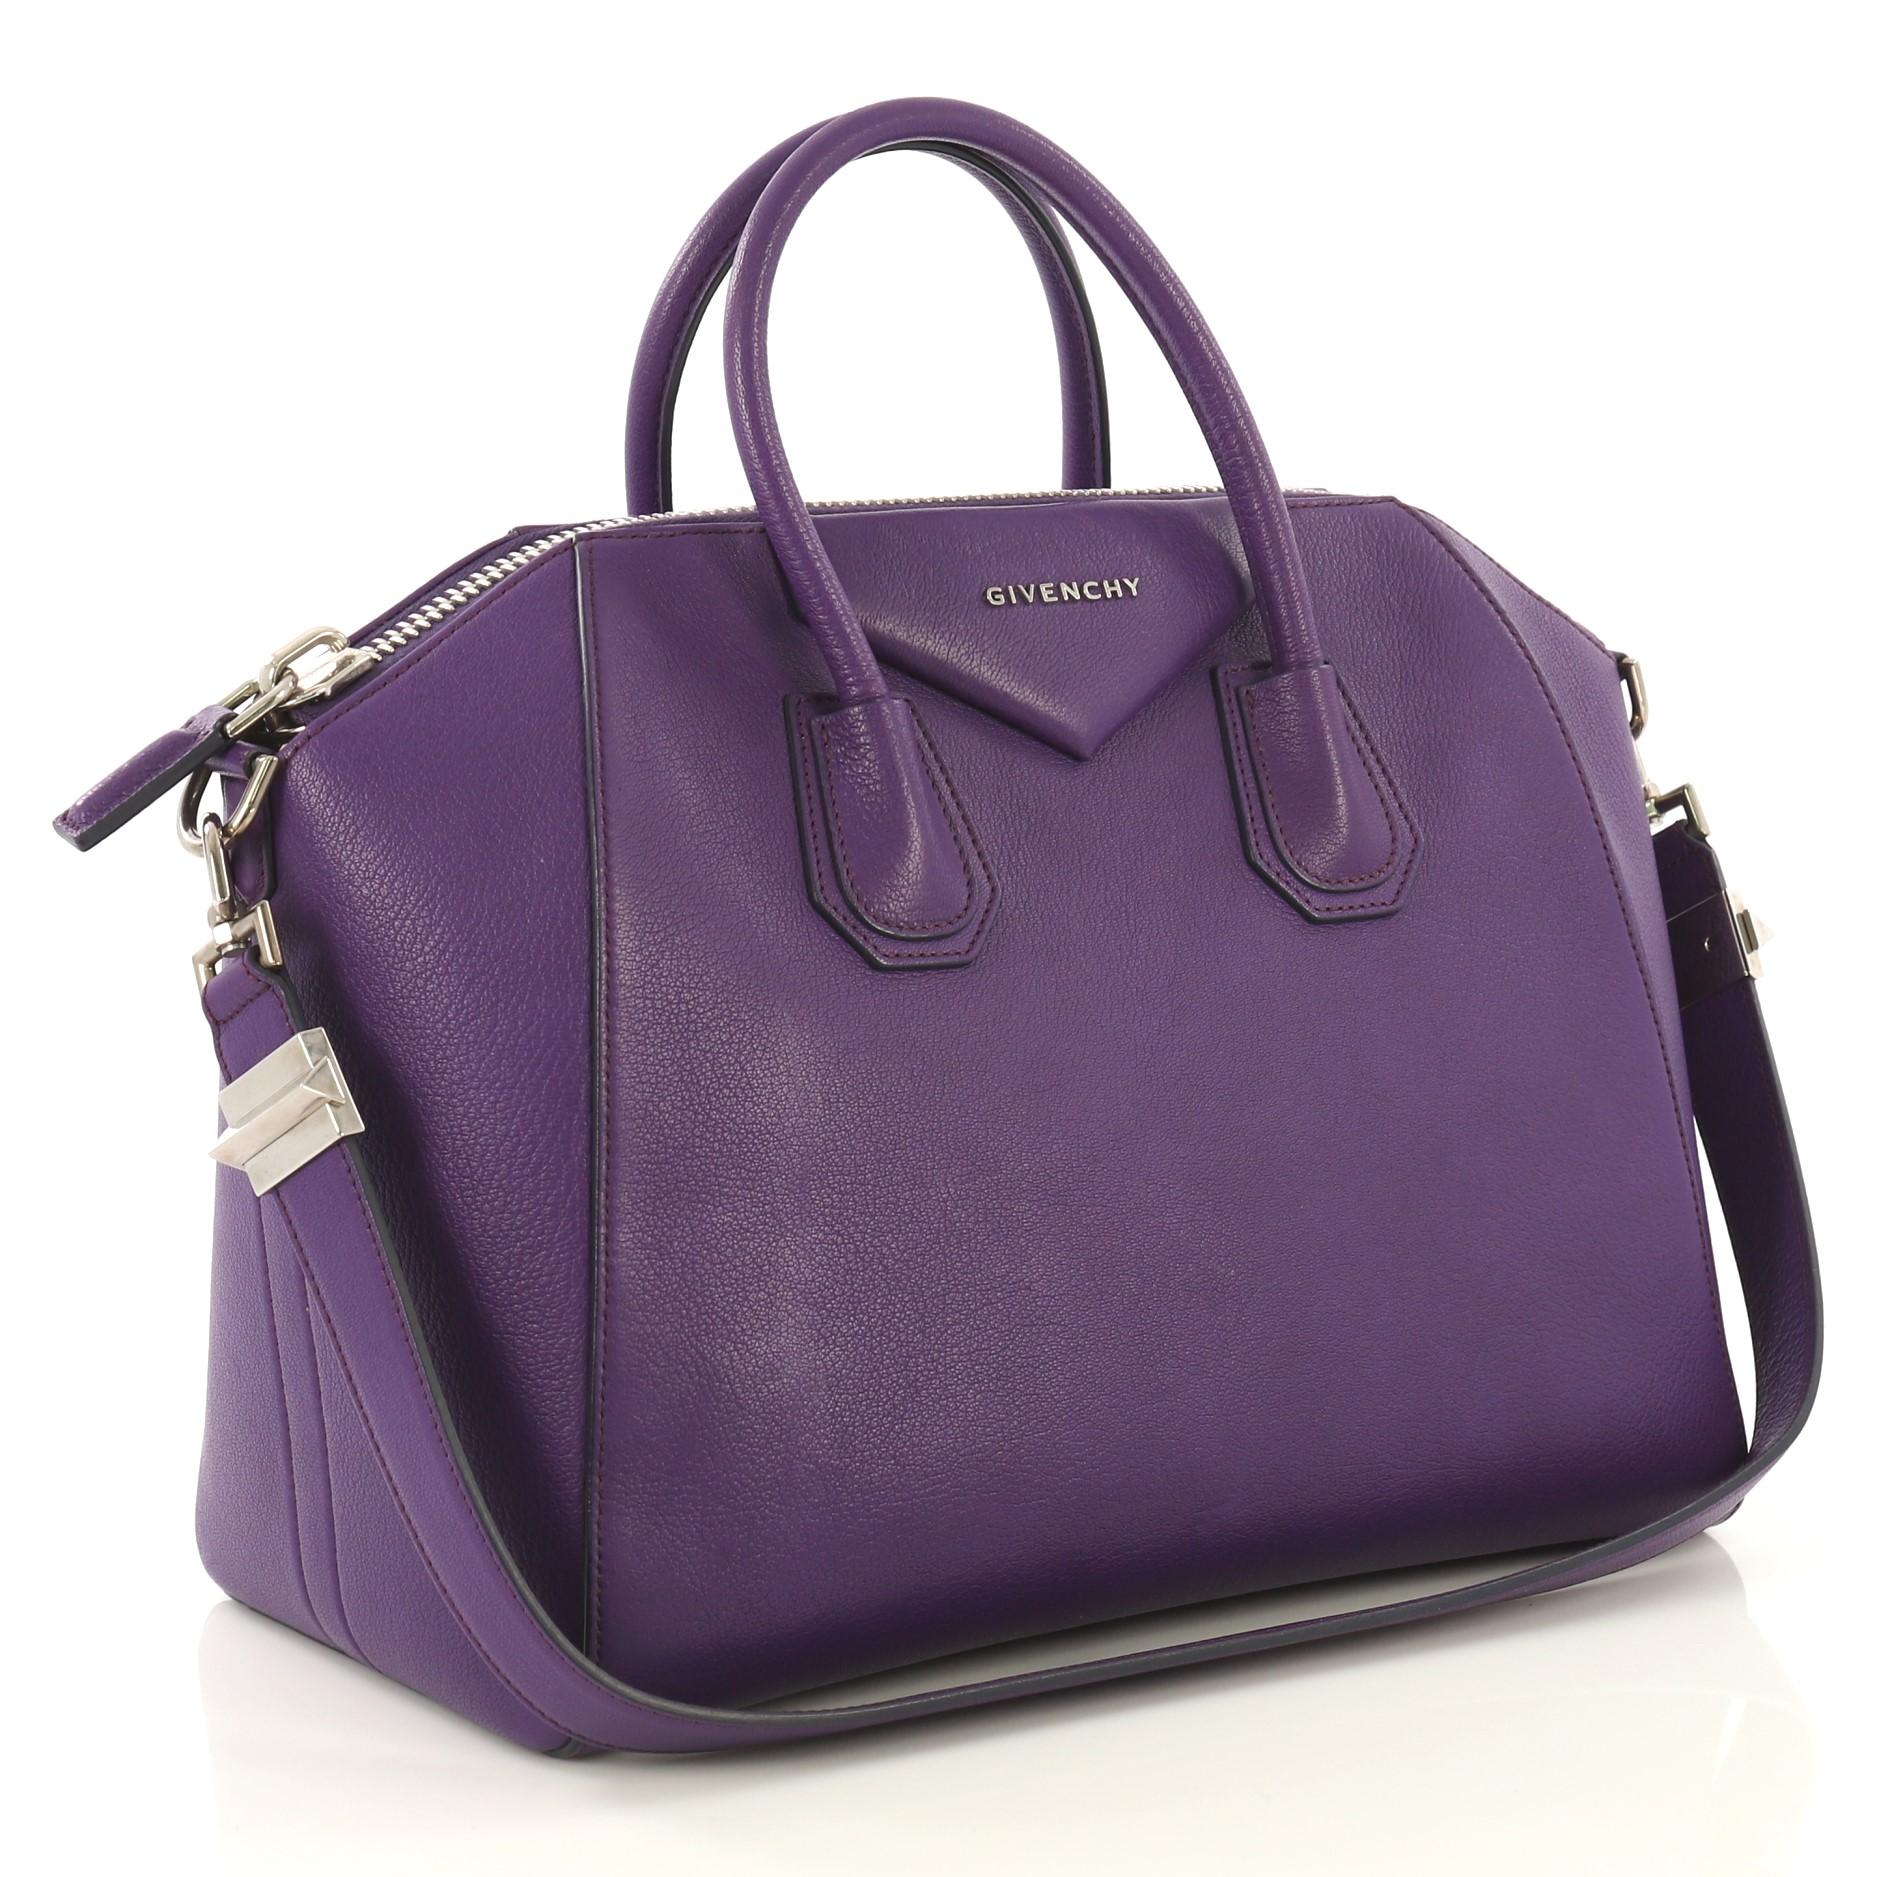 This Givenchy Antigona Bag Leather Medium, crafted from purple leather, features dual rolled leather handles and silver-tone hardware. Its zip-around closure opens to a beige fabric interior with zip and slip pockets. 

Estimated Retail Price: